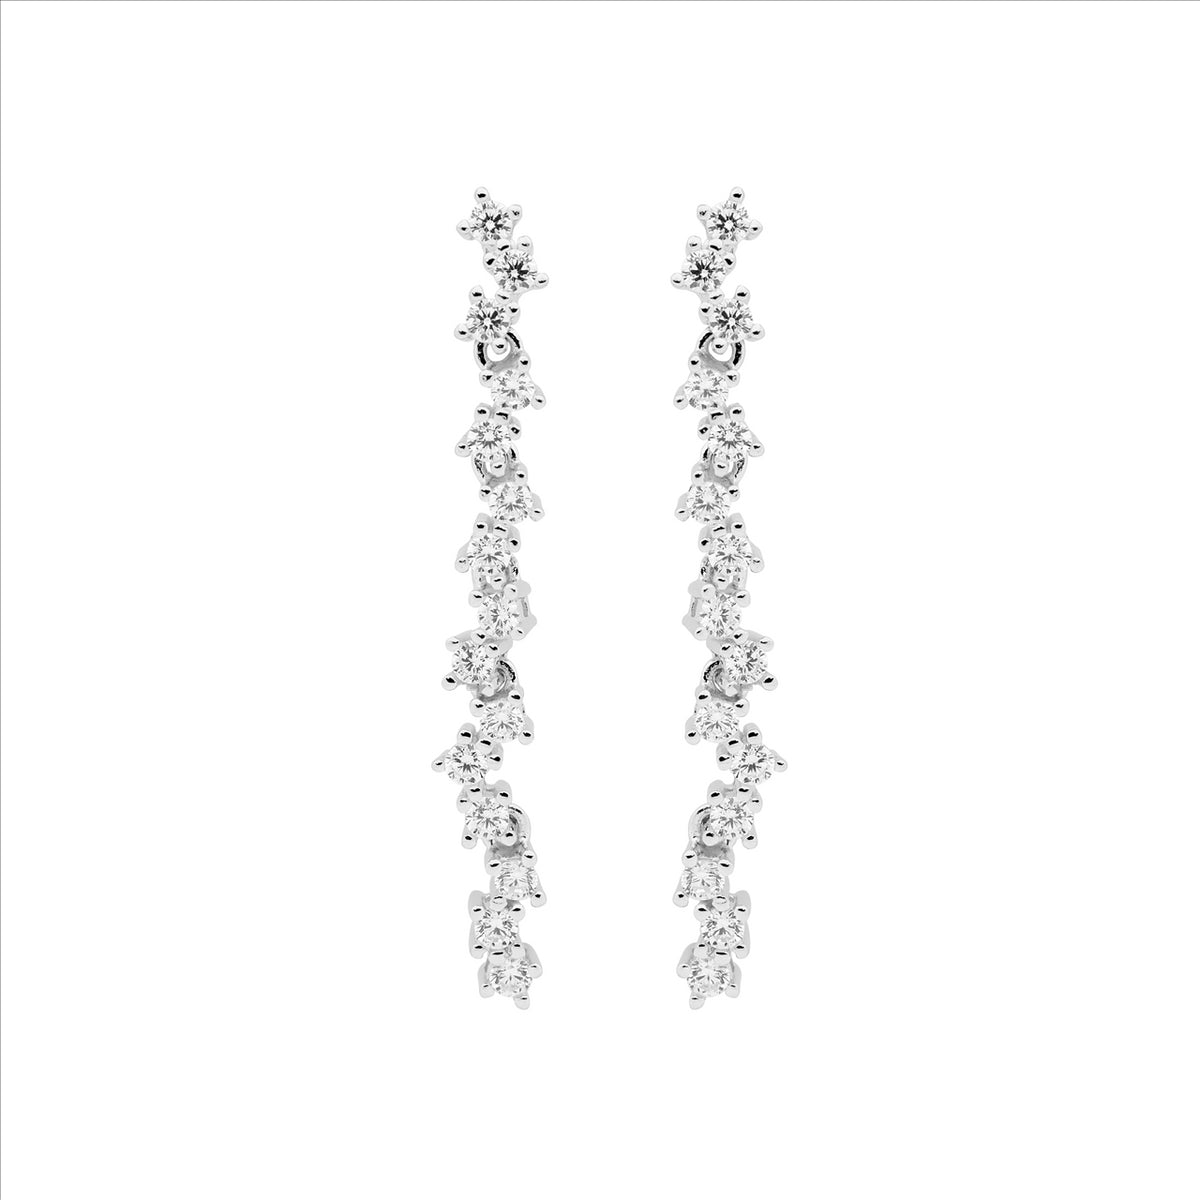 Dazzling Silver Drop Earrings with Cubic Zirconia Accents